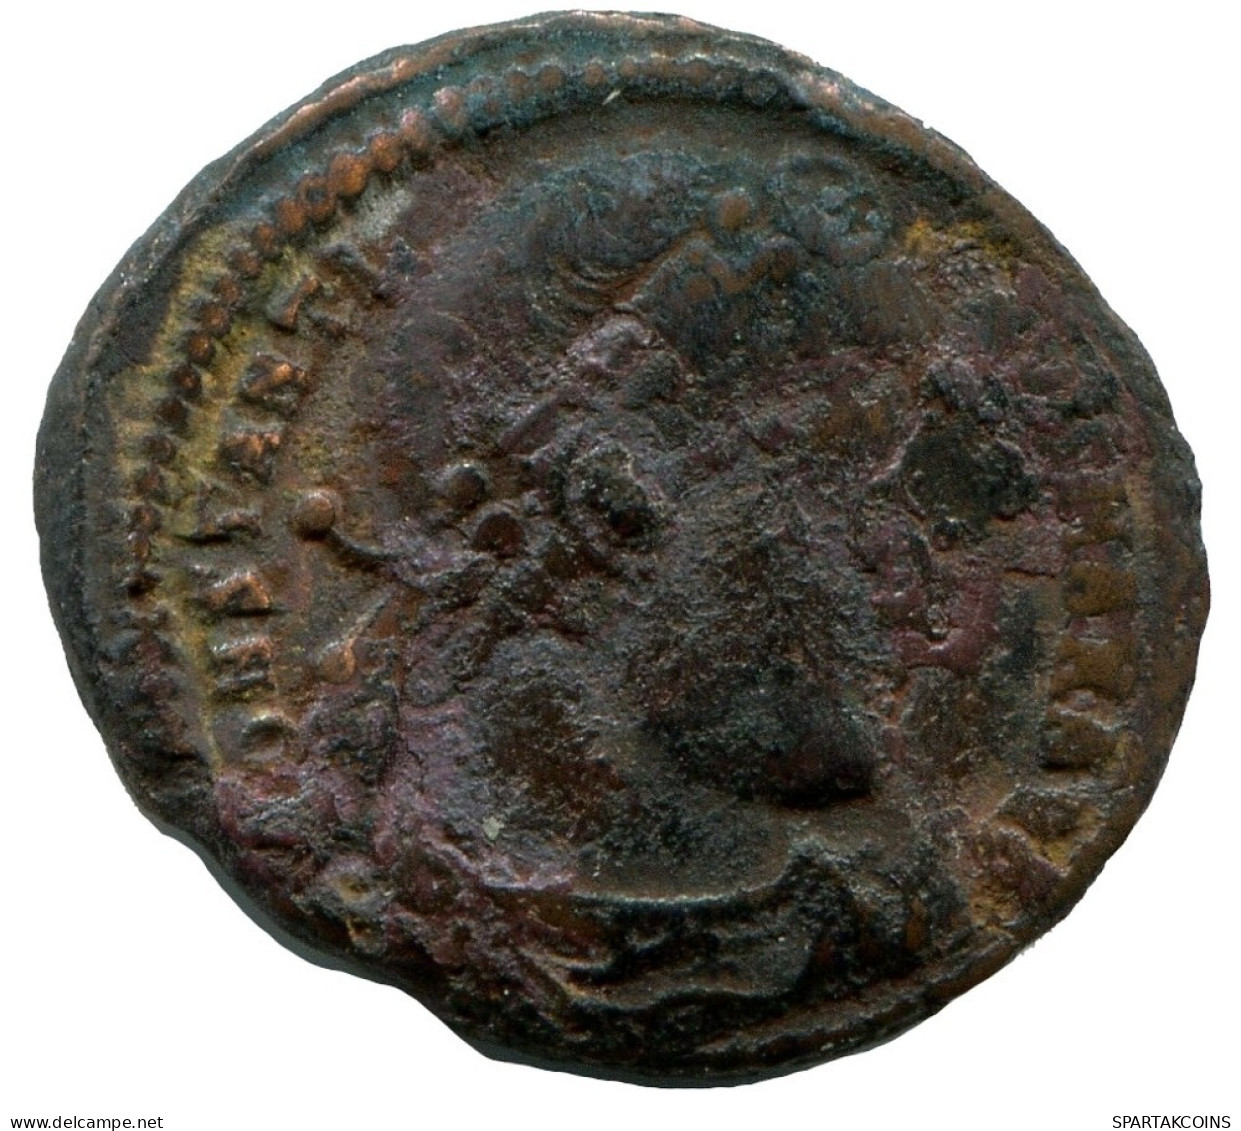 CONSTANTINE I MINTED IN ANTIOCH FOUND IN IHNASYAH HOARD EGYPT #ANC10680.14.F.A - El Imperio Christiano (307 / 363)